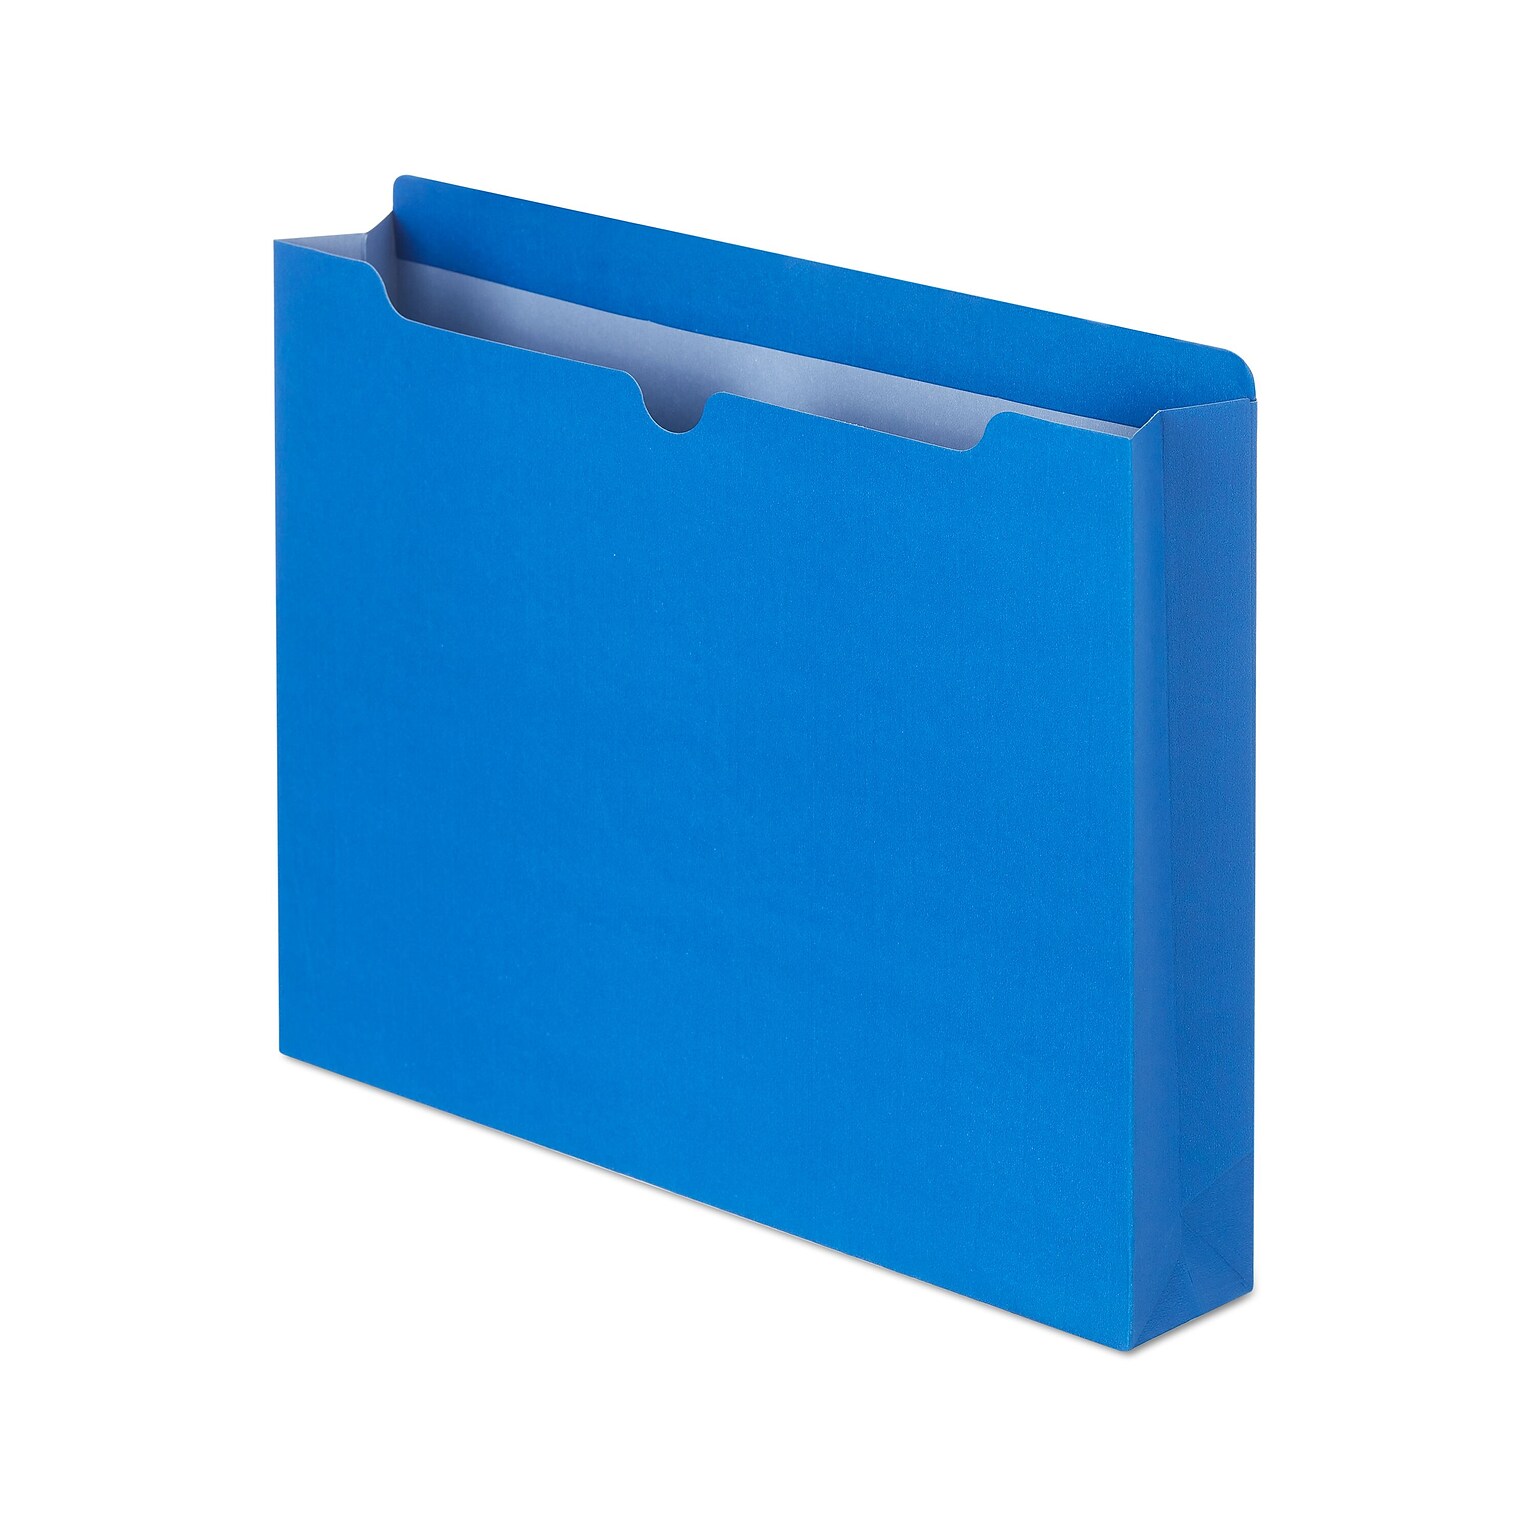 Quill Brand® Reinforced File Jacket, 2 Expansion, Letter Size, Blue, 50/Box (74920BE)